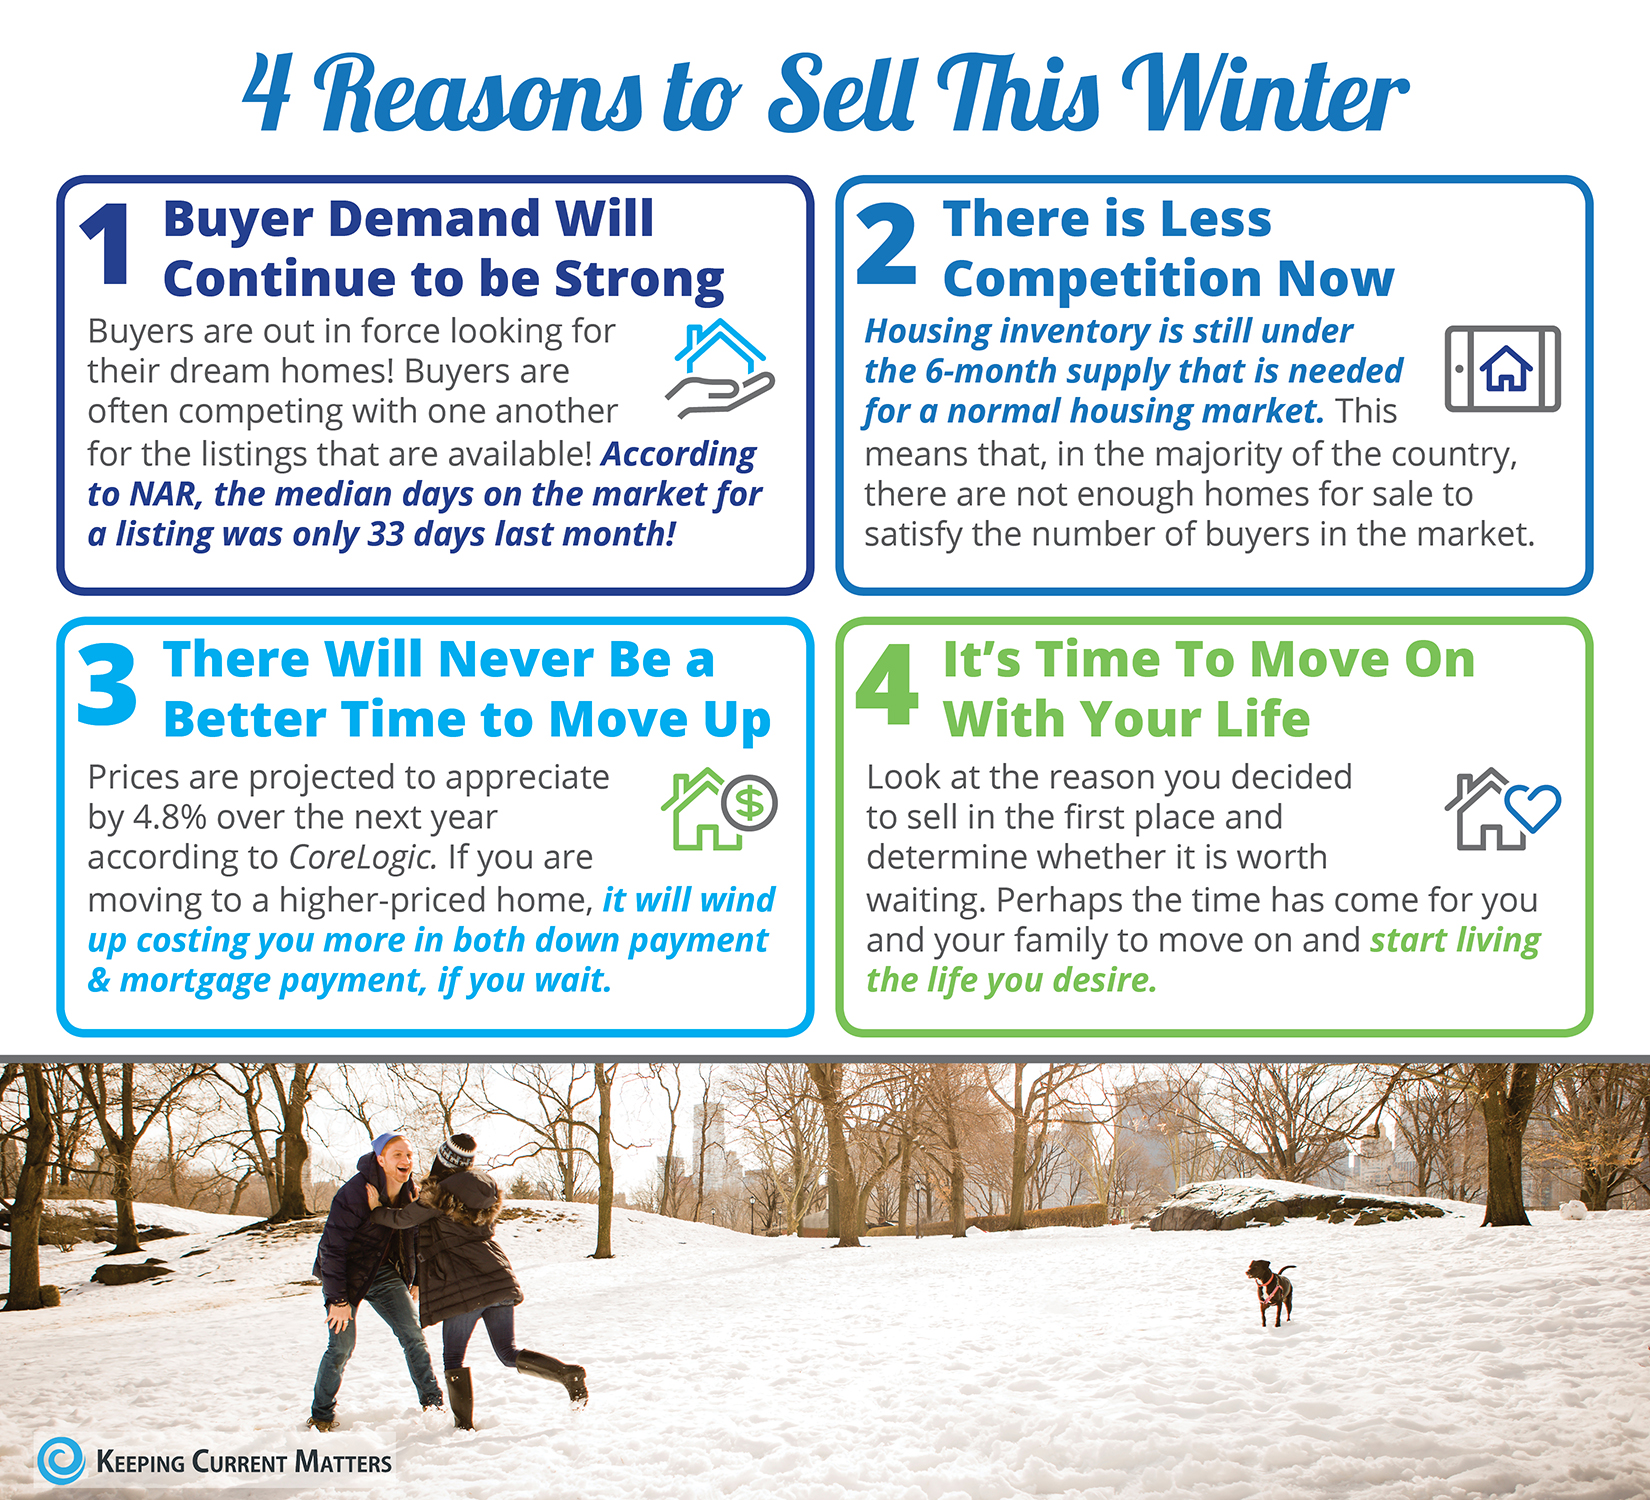 4 Reasons to Sell Your House This Winter [INFOGRAPHIC] | Keeping Current Matters